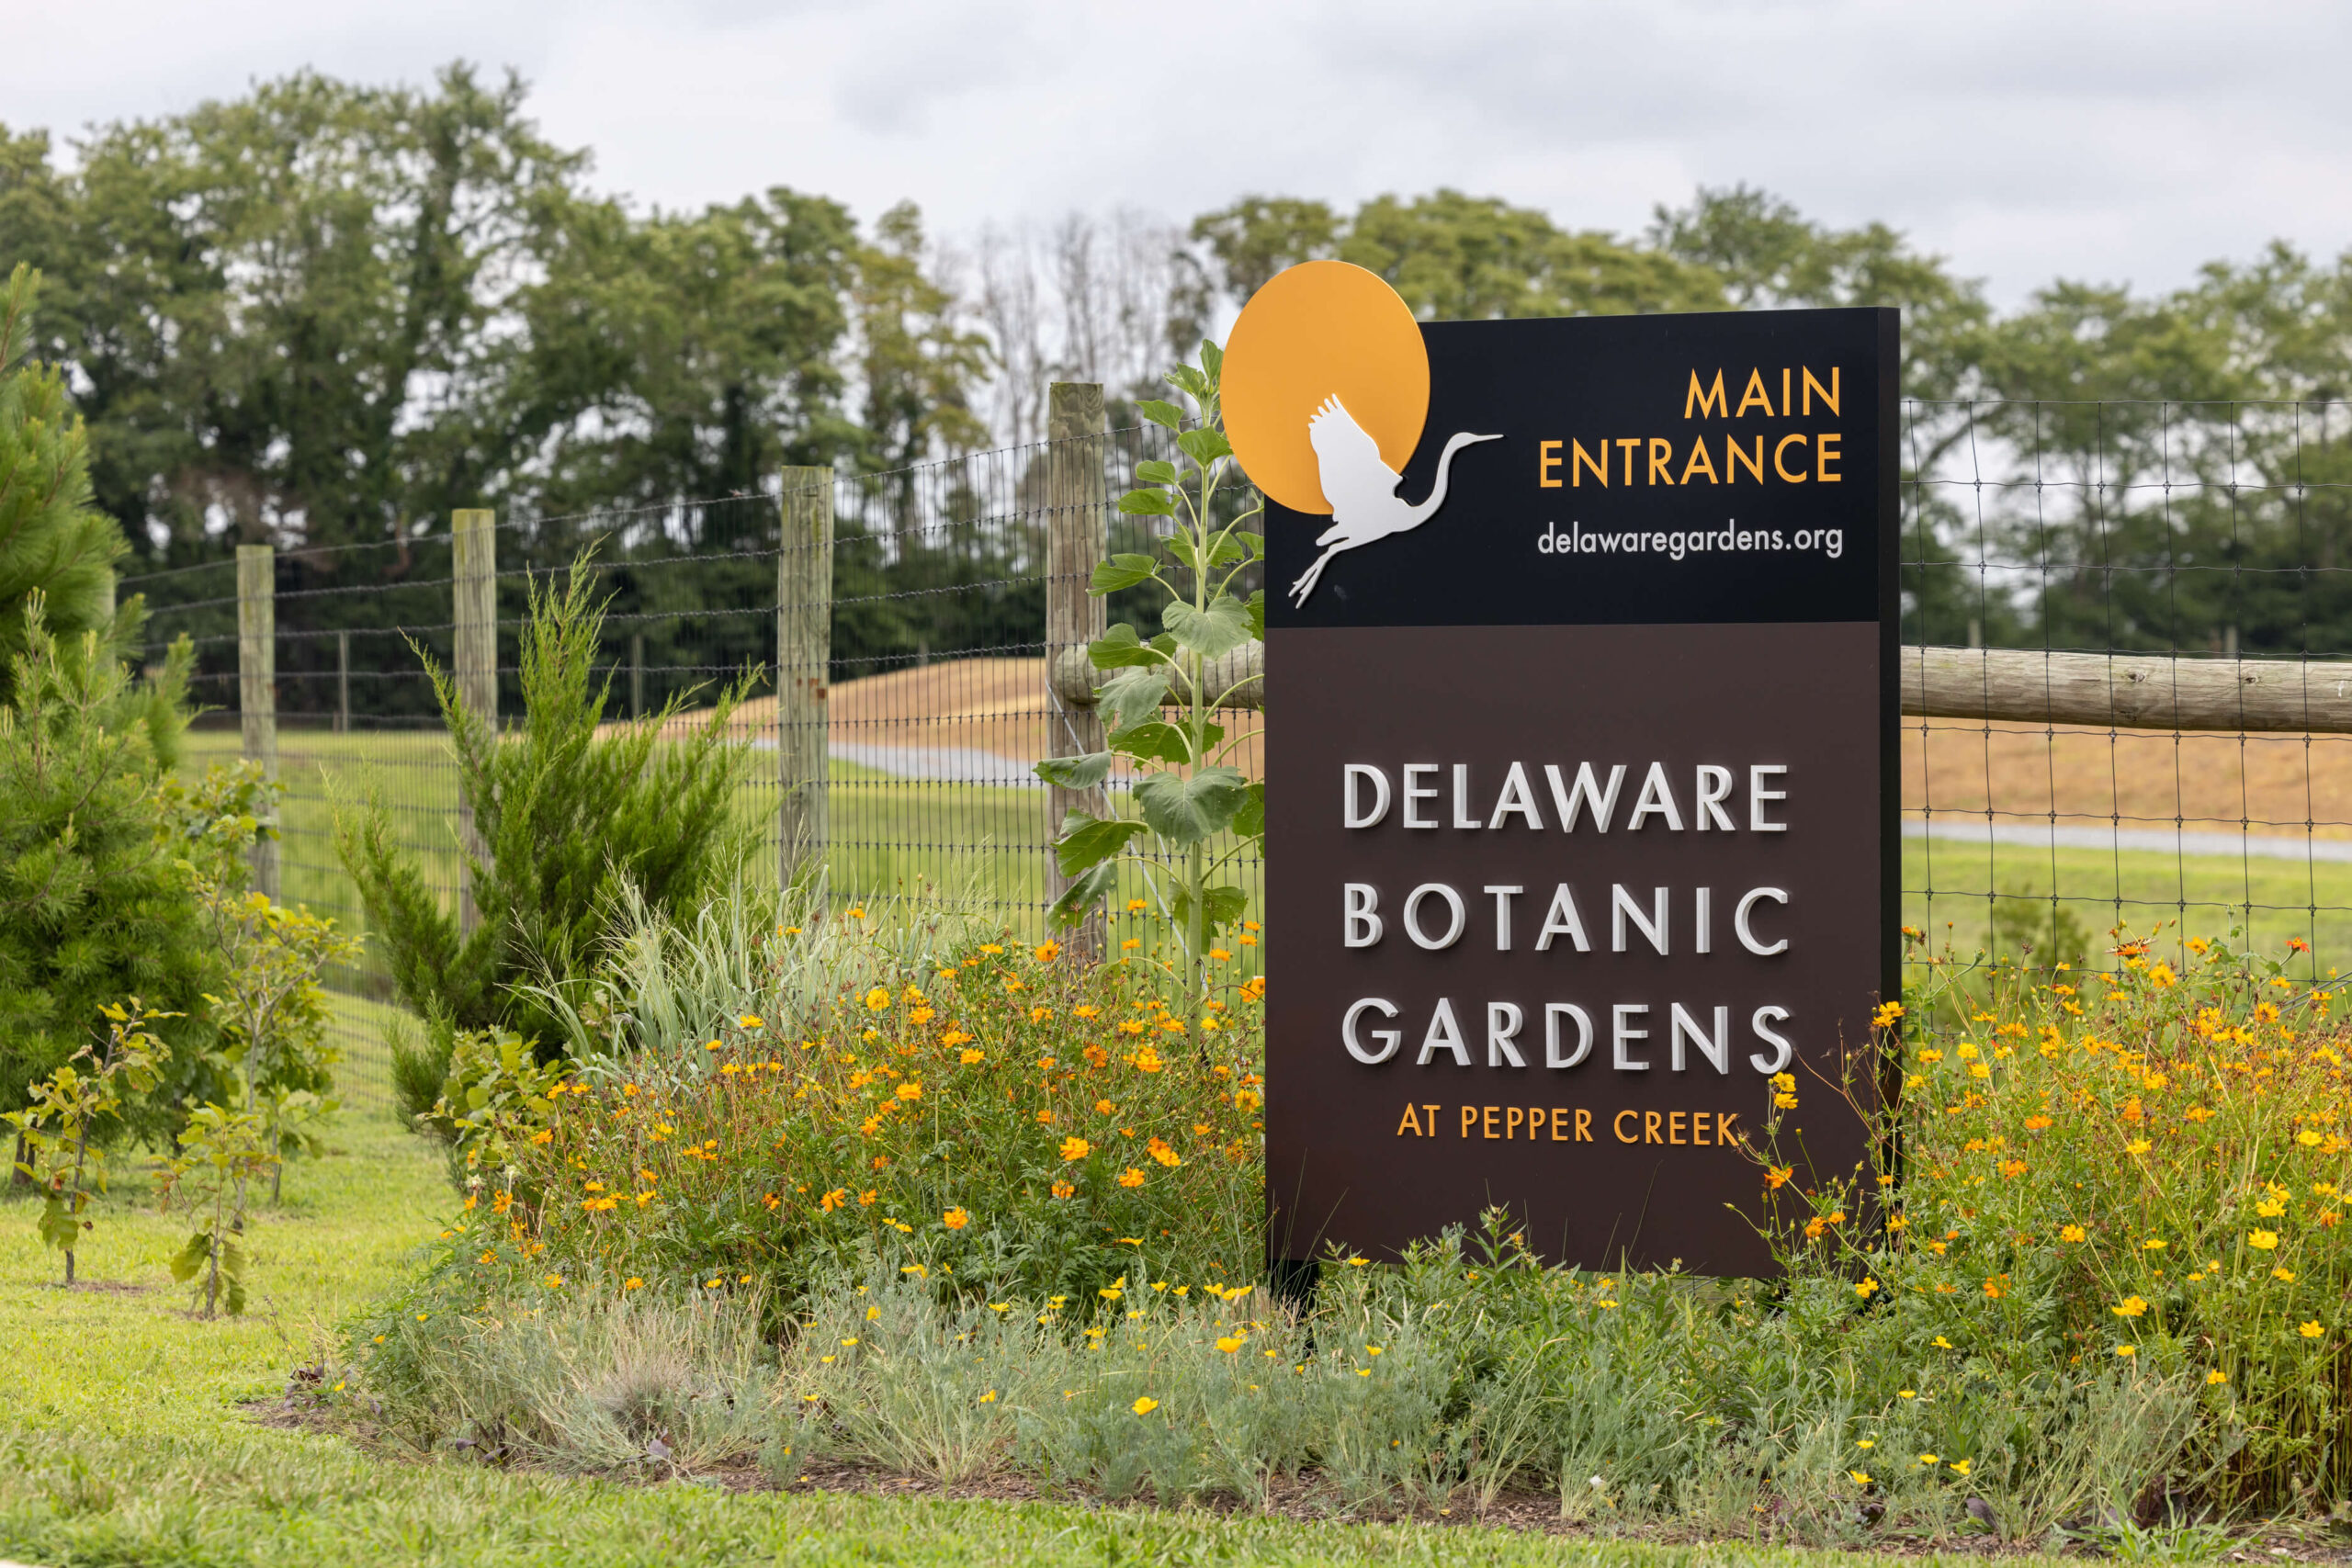 modern front entrance sign of the delaware botanic gardens at pepper creek with orange and yellow flowers